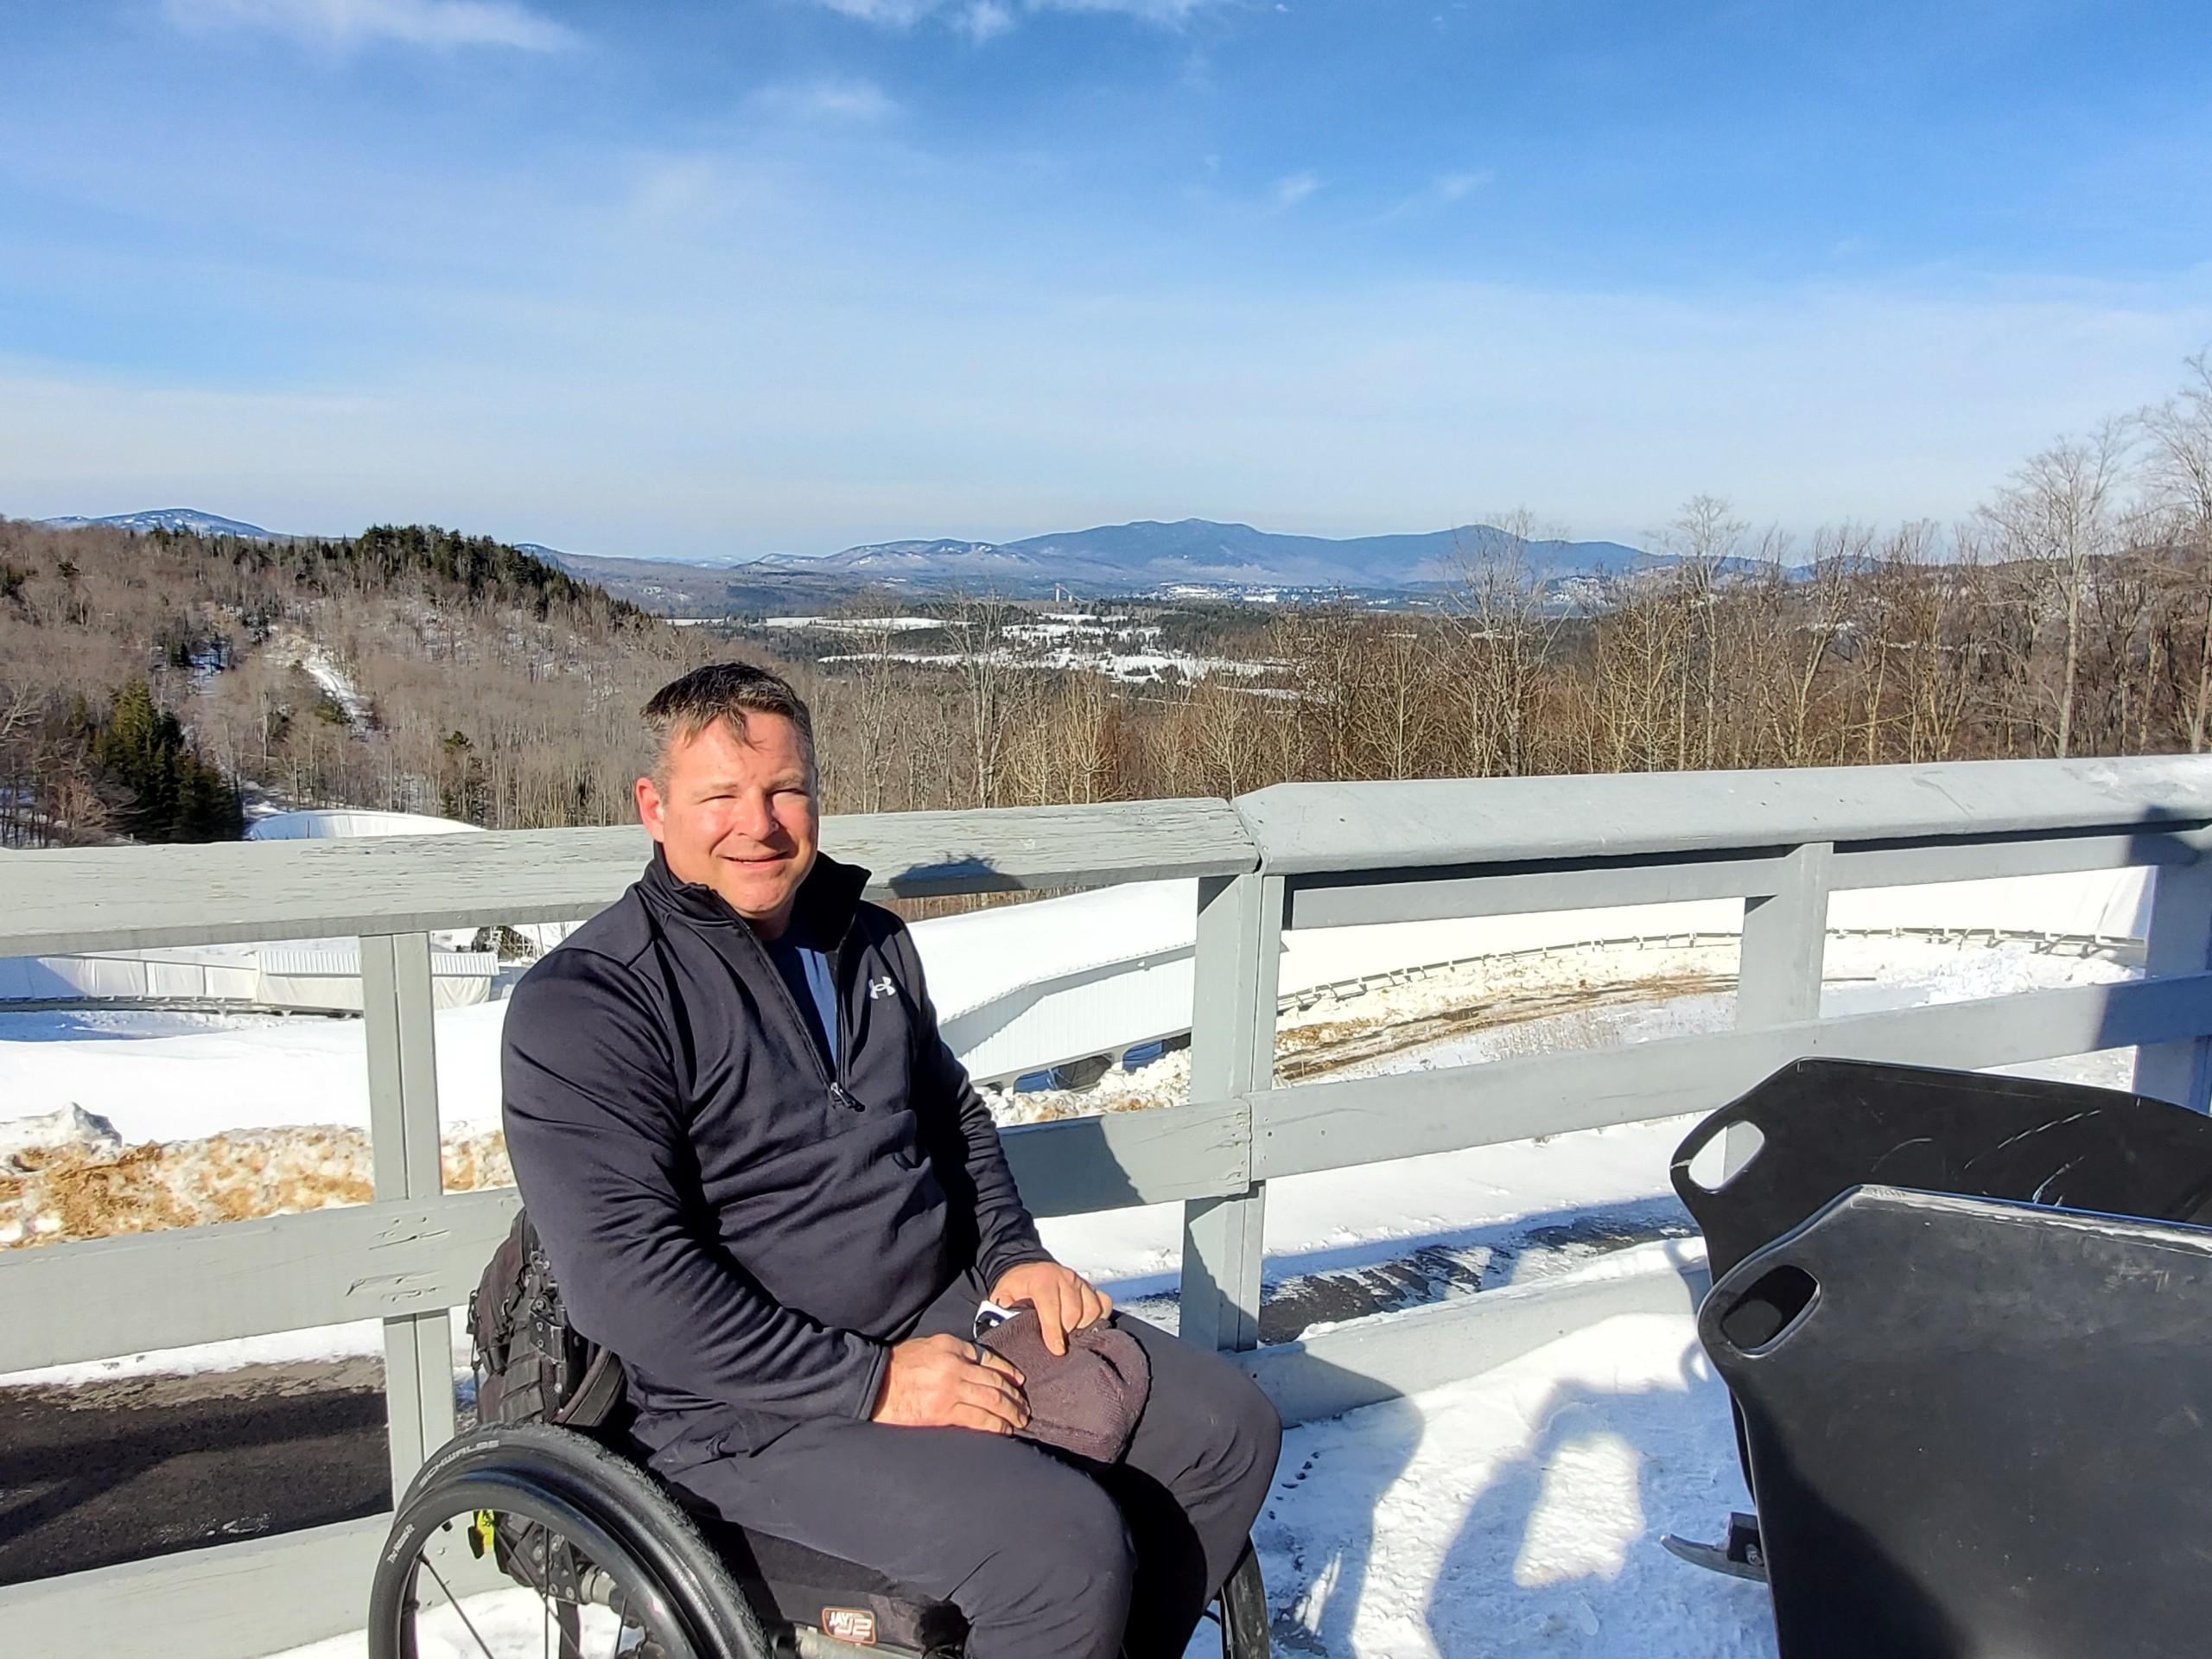 David Christopher in his wheelchair smiling with a wintery Lake Placid behind him. Image courtesy of David Christopher.